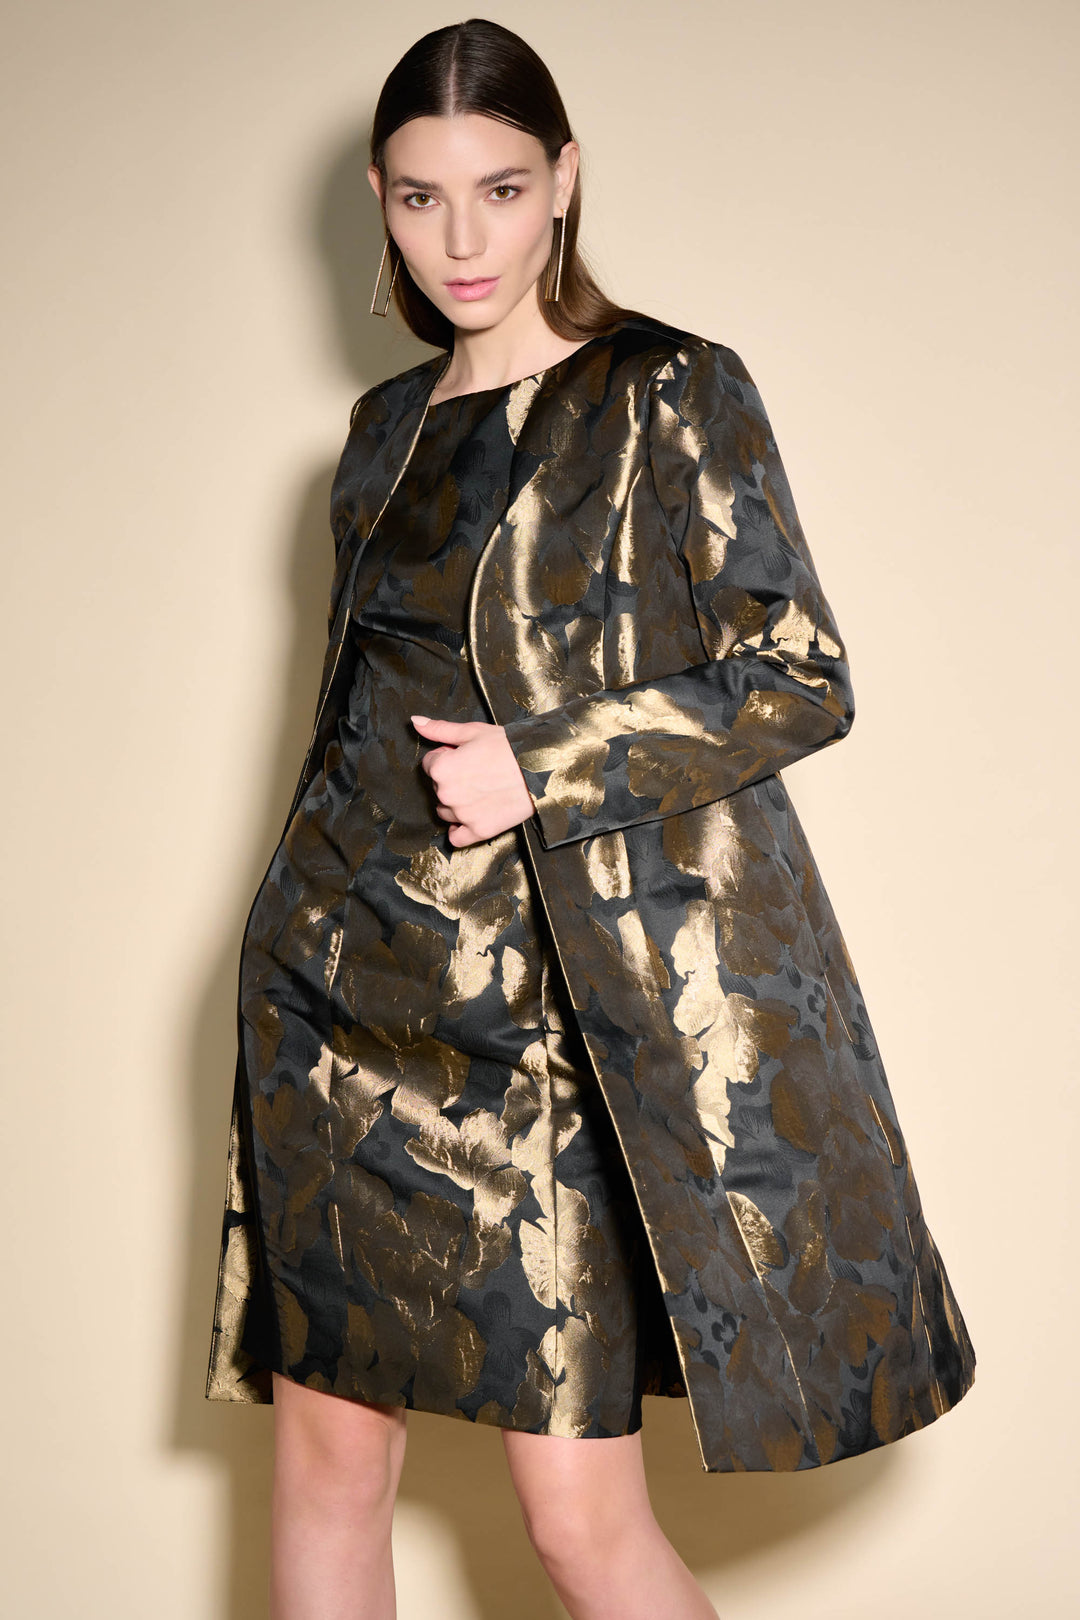 It features an open style light coat and an all-over foil leaf print that adds a glossy golden shine,